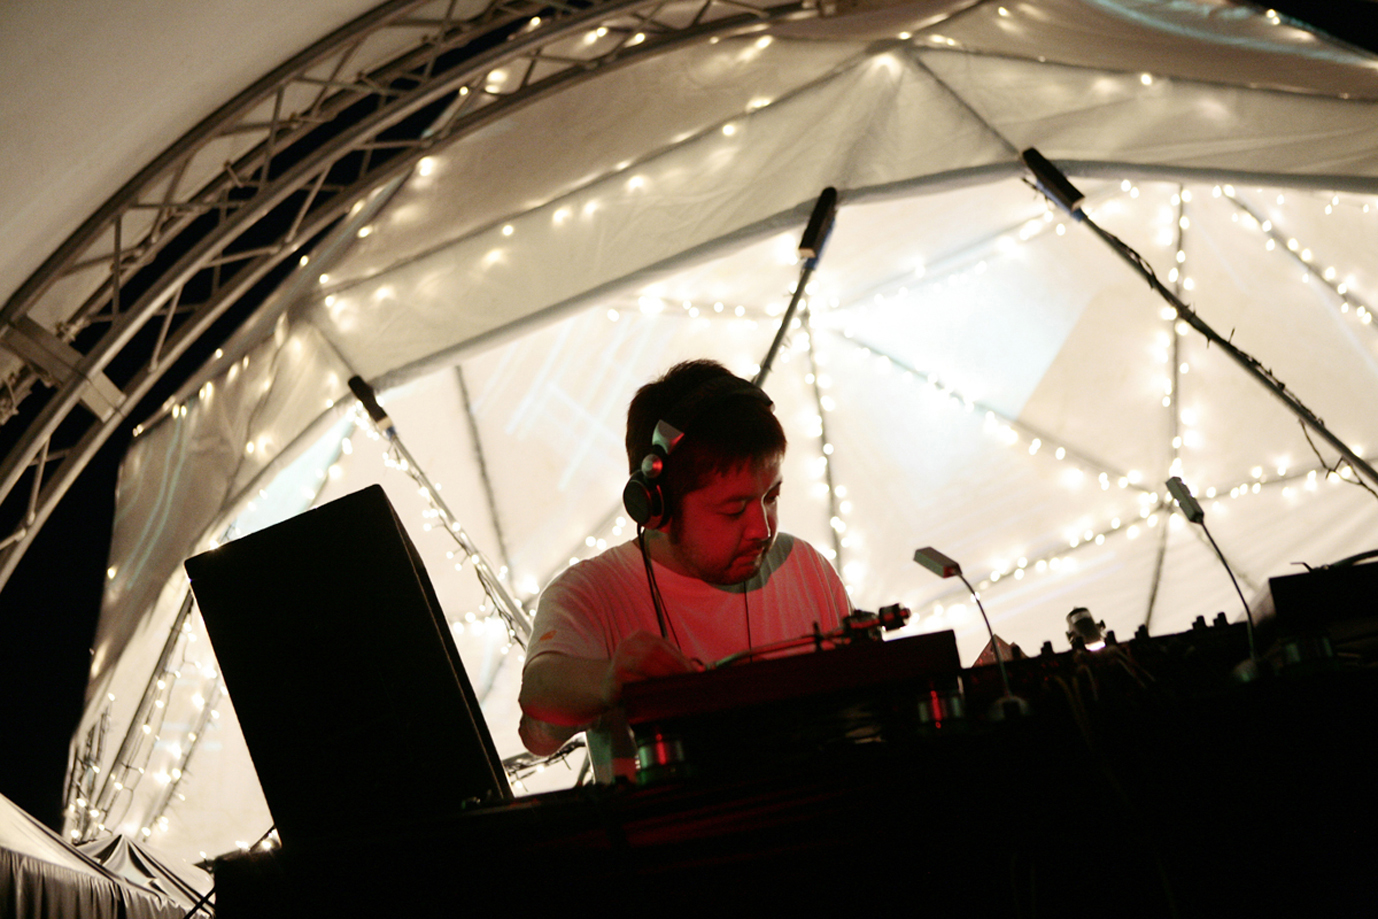 Highly respected: Jun Seba, aka Nujabes, is still popular with music fans five years after his untimely death. | YOSHIHARU OTA